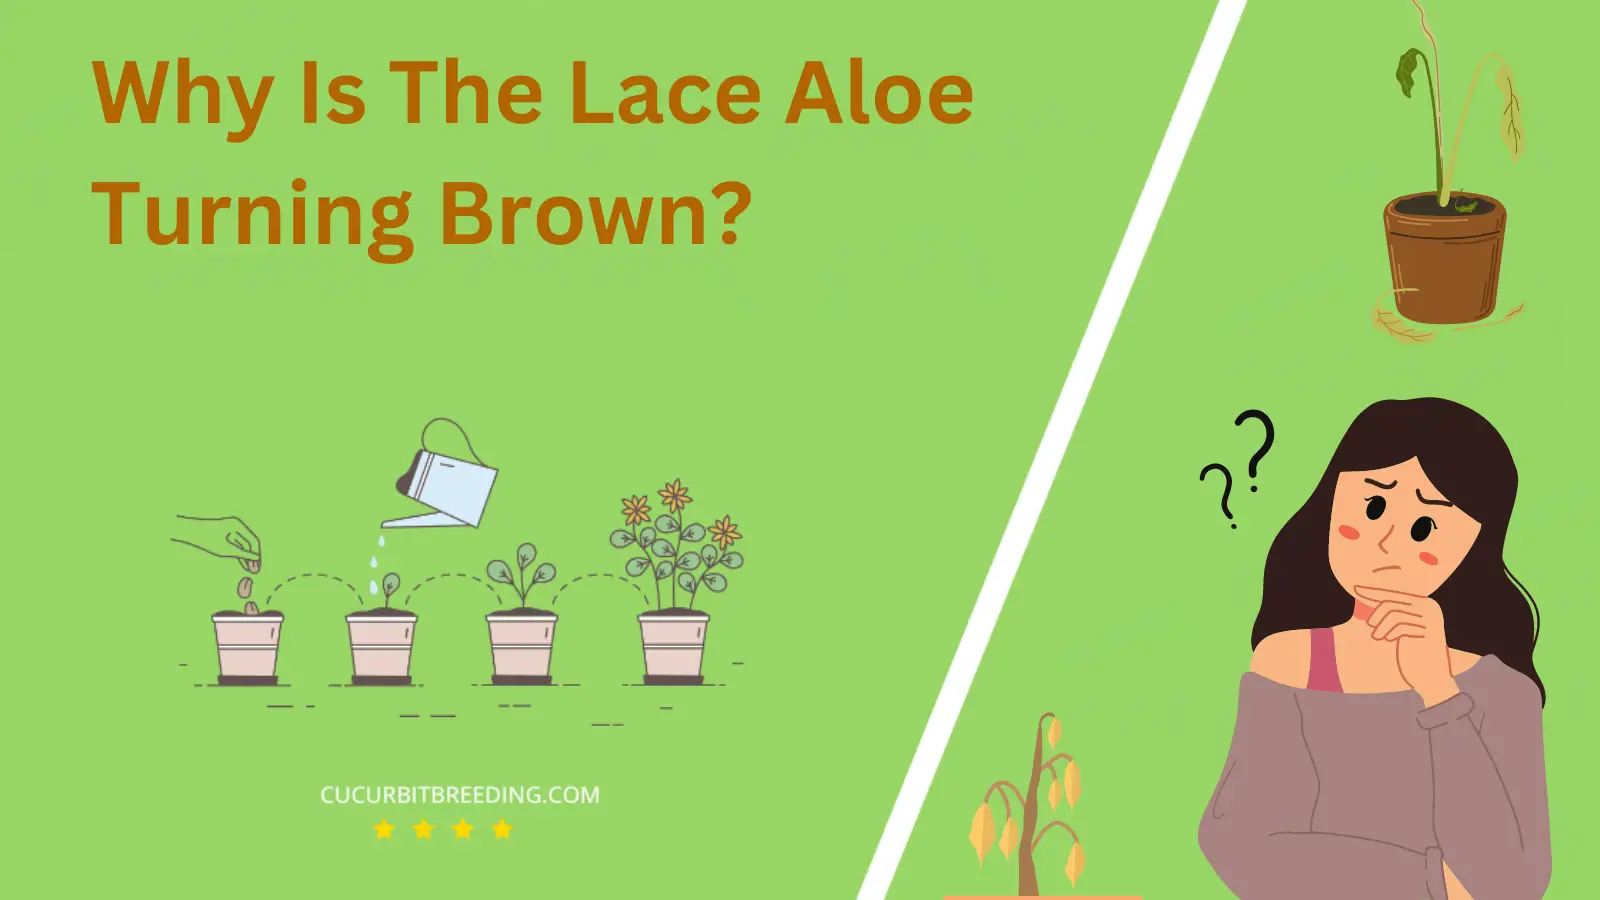 Why Is The Lace Aloe Turning Brown